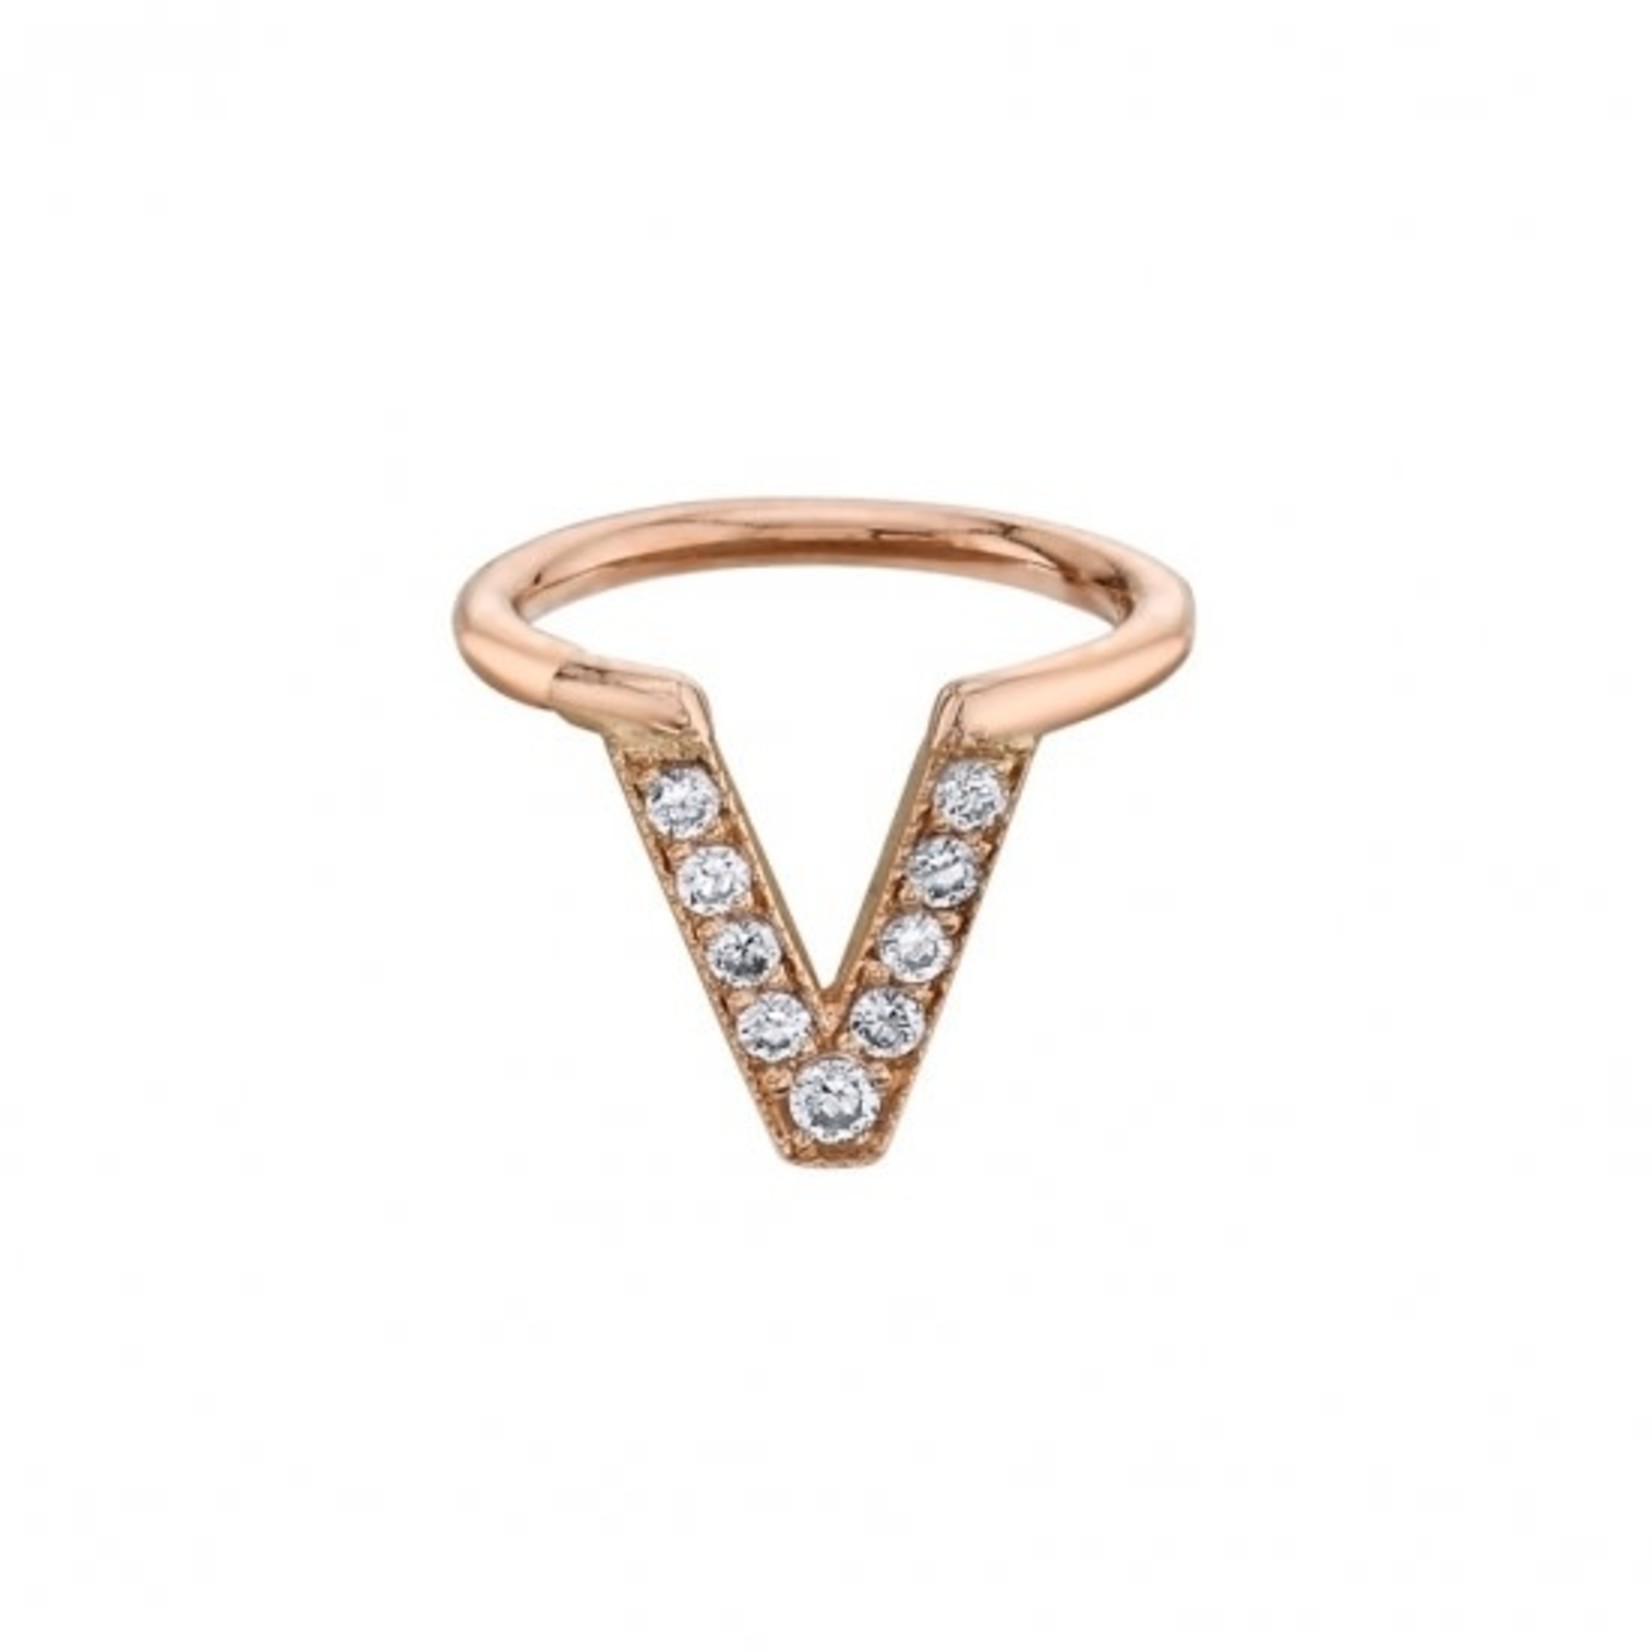 BVLA BVLA 18g "Jennelle V" seam ring with 8x 1.0 CZ and 1x 1.25 CZ